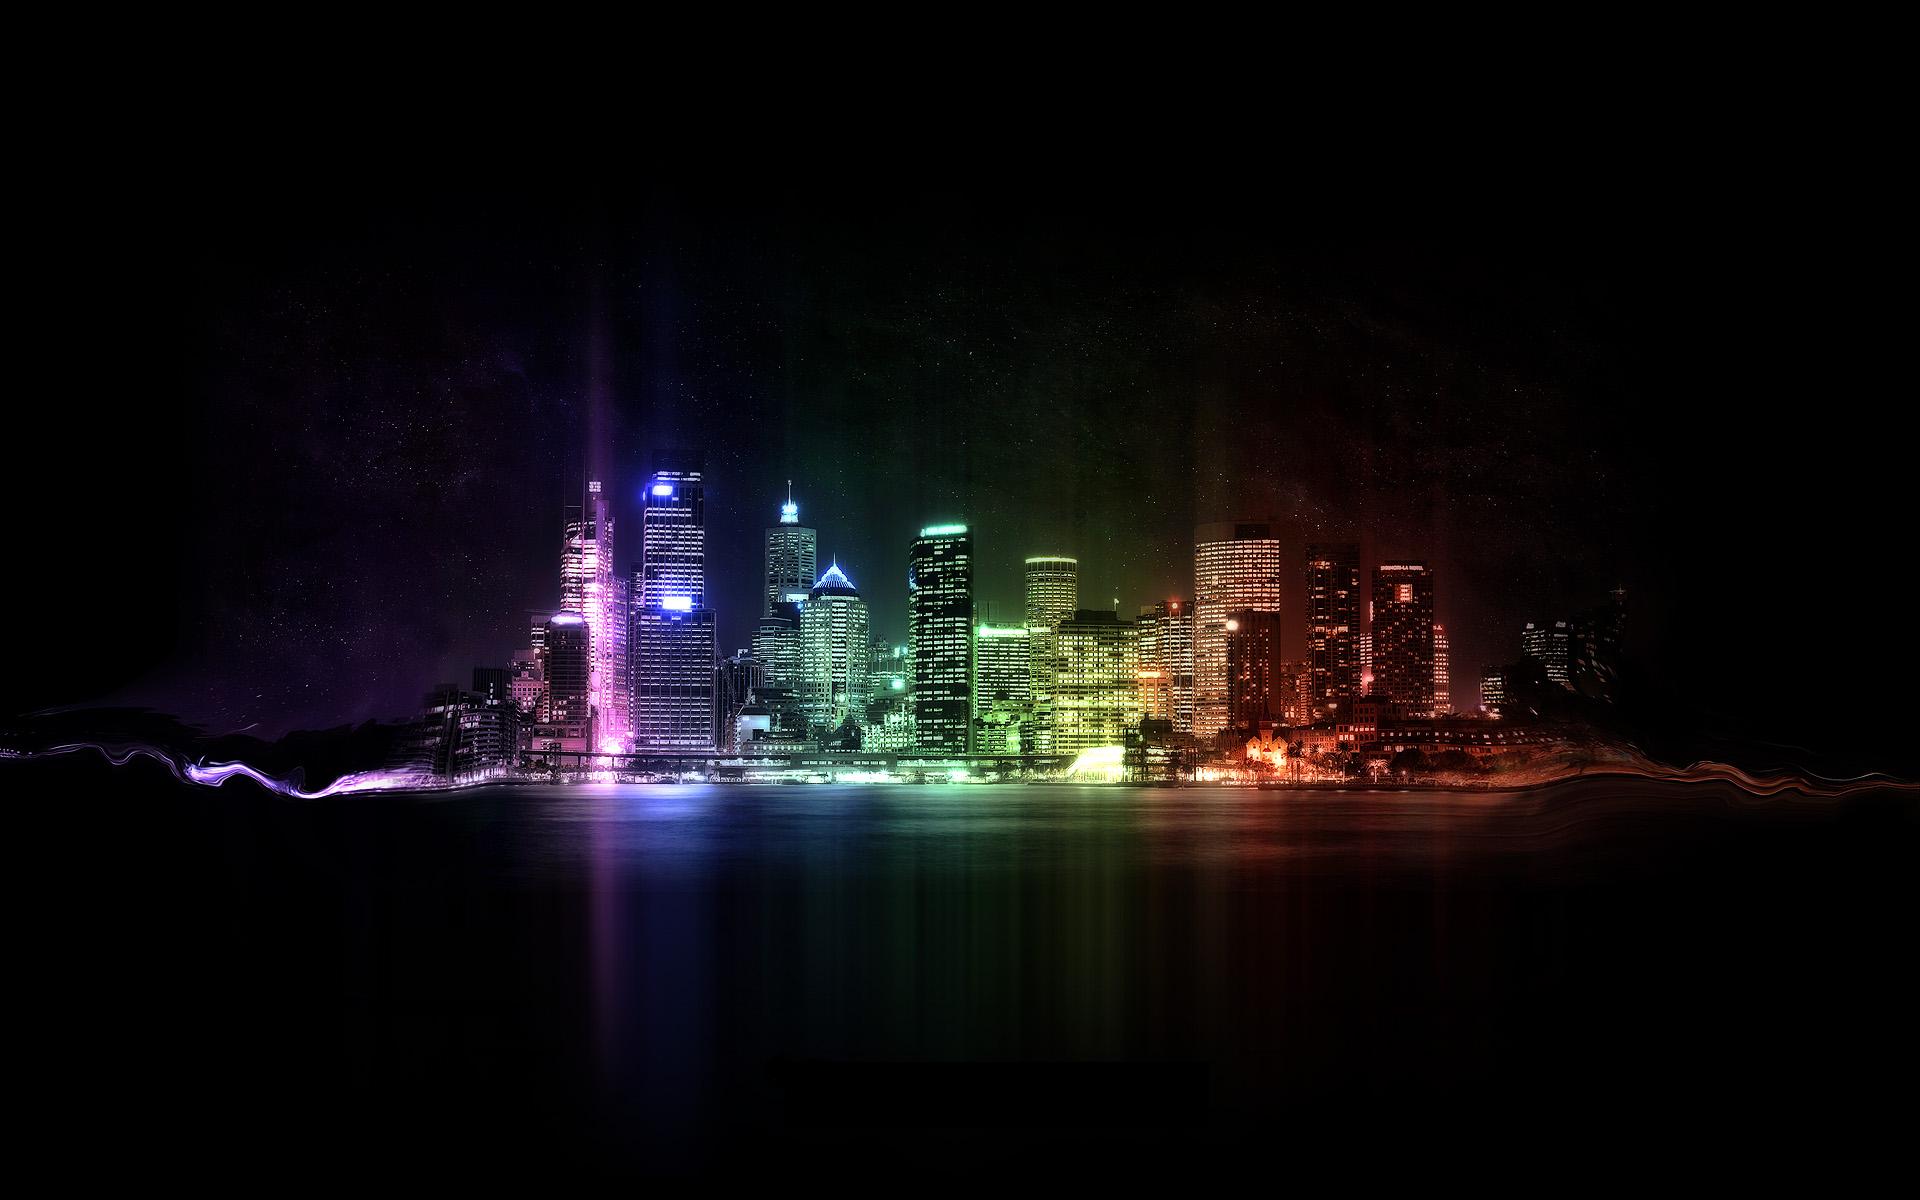 man made, light, water, night, building, city, colors